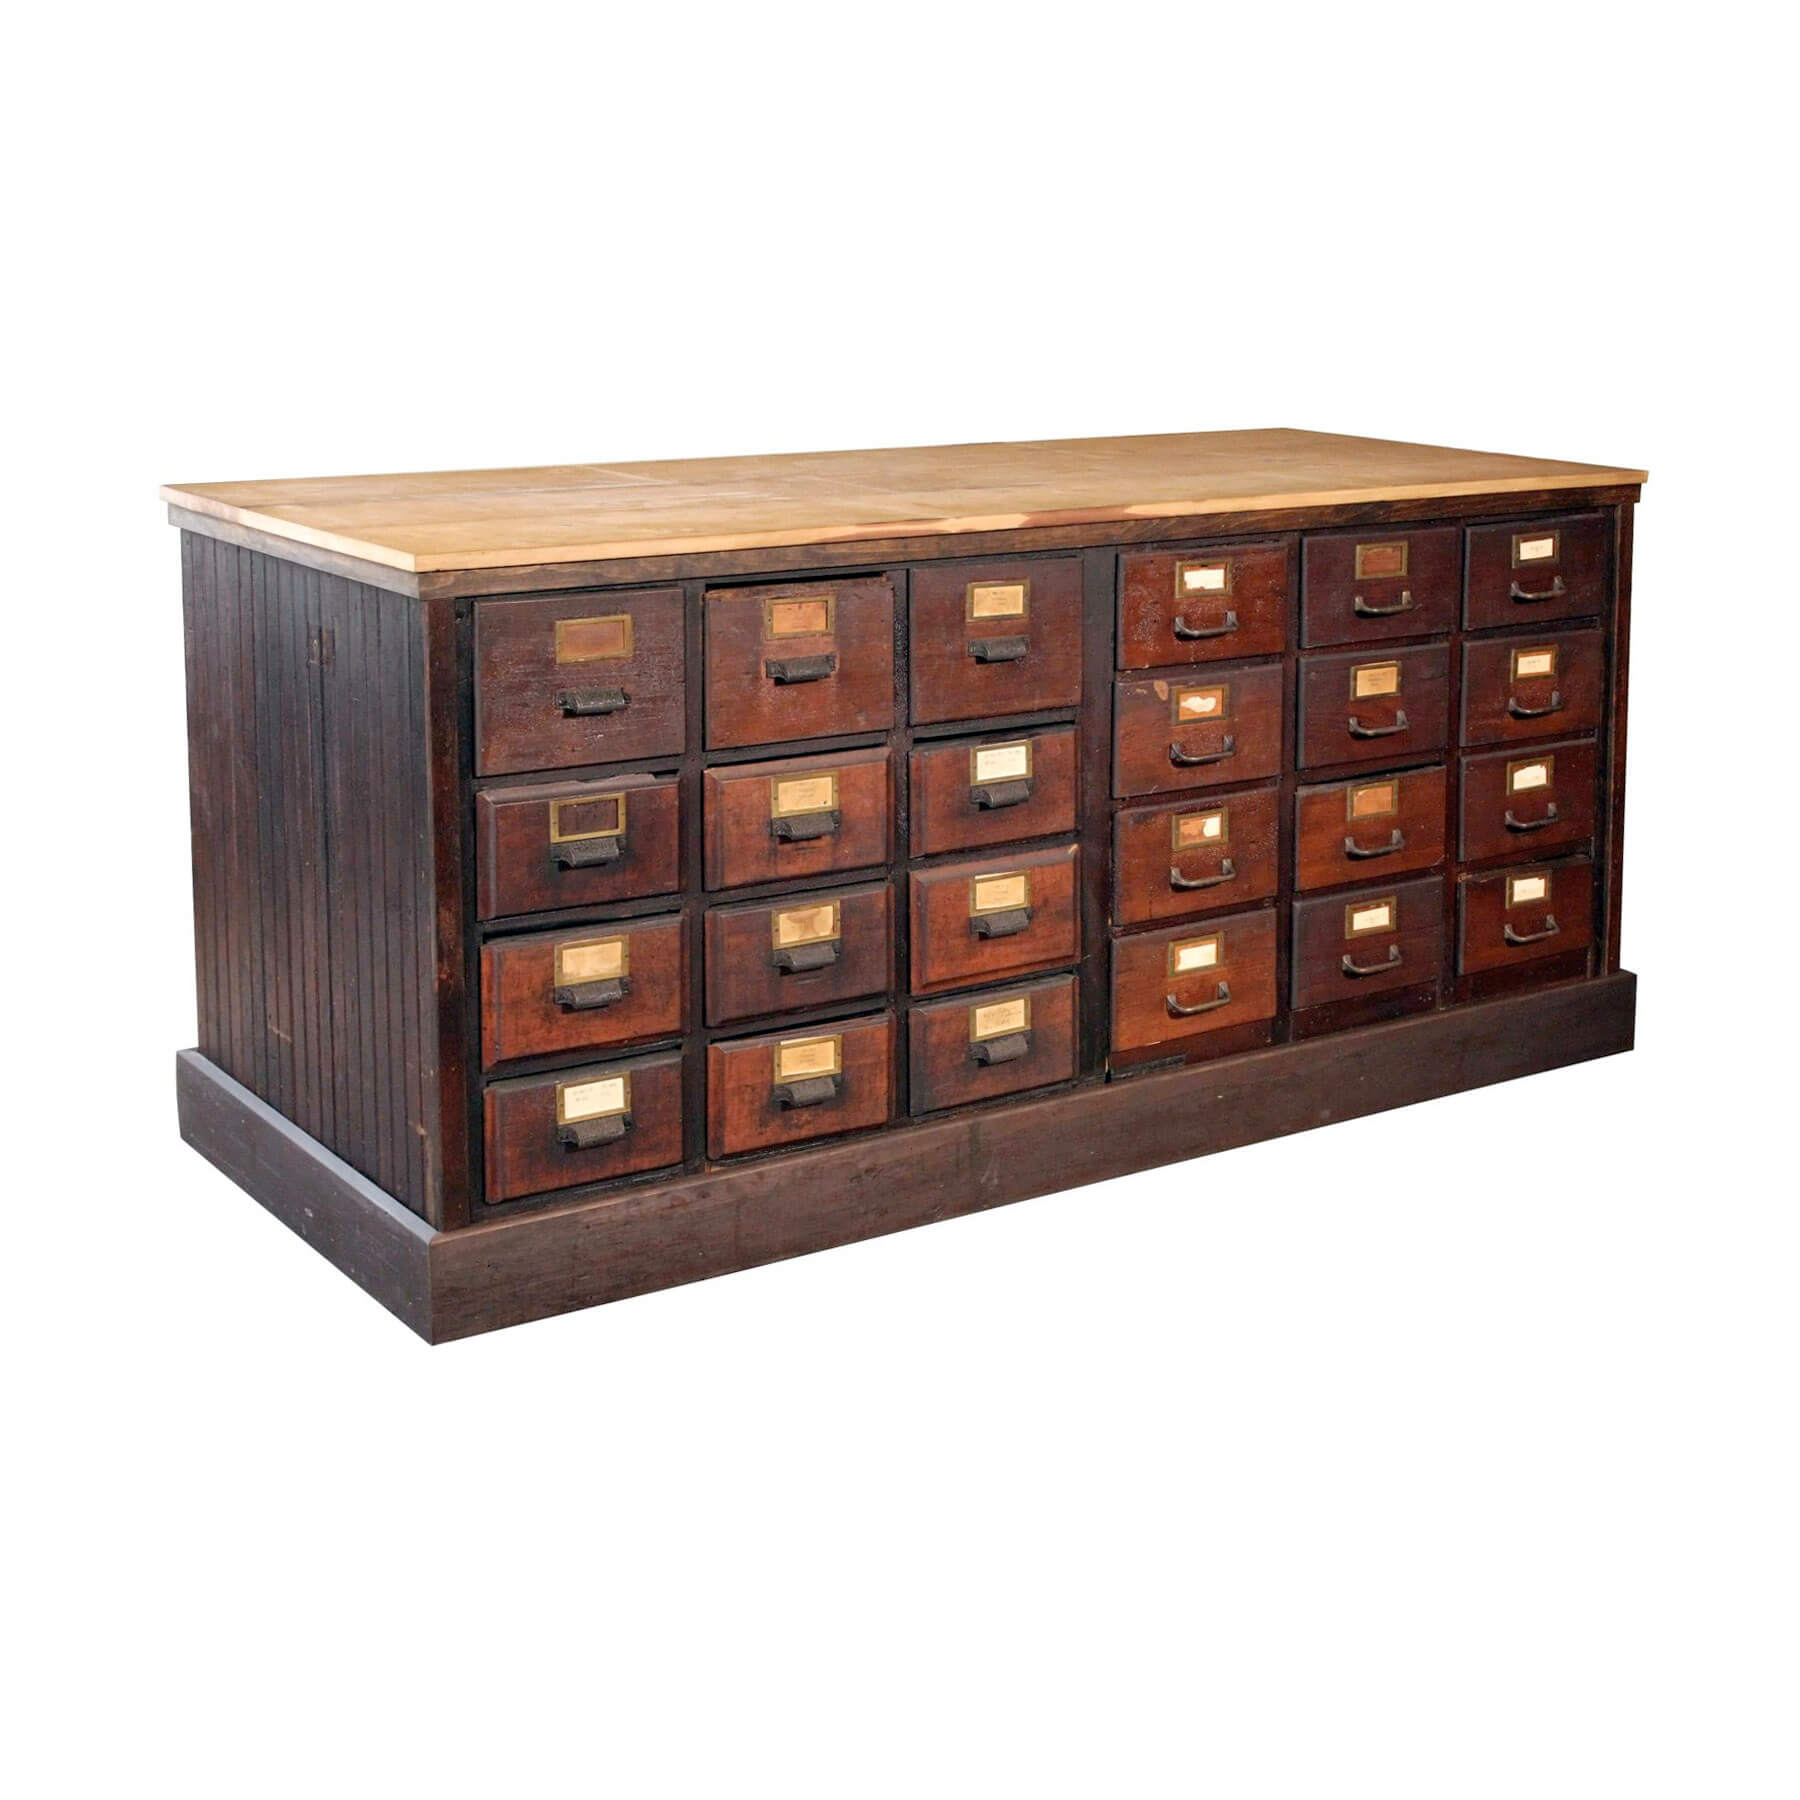 Multidrawer Apothecary Cabinet